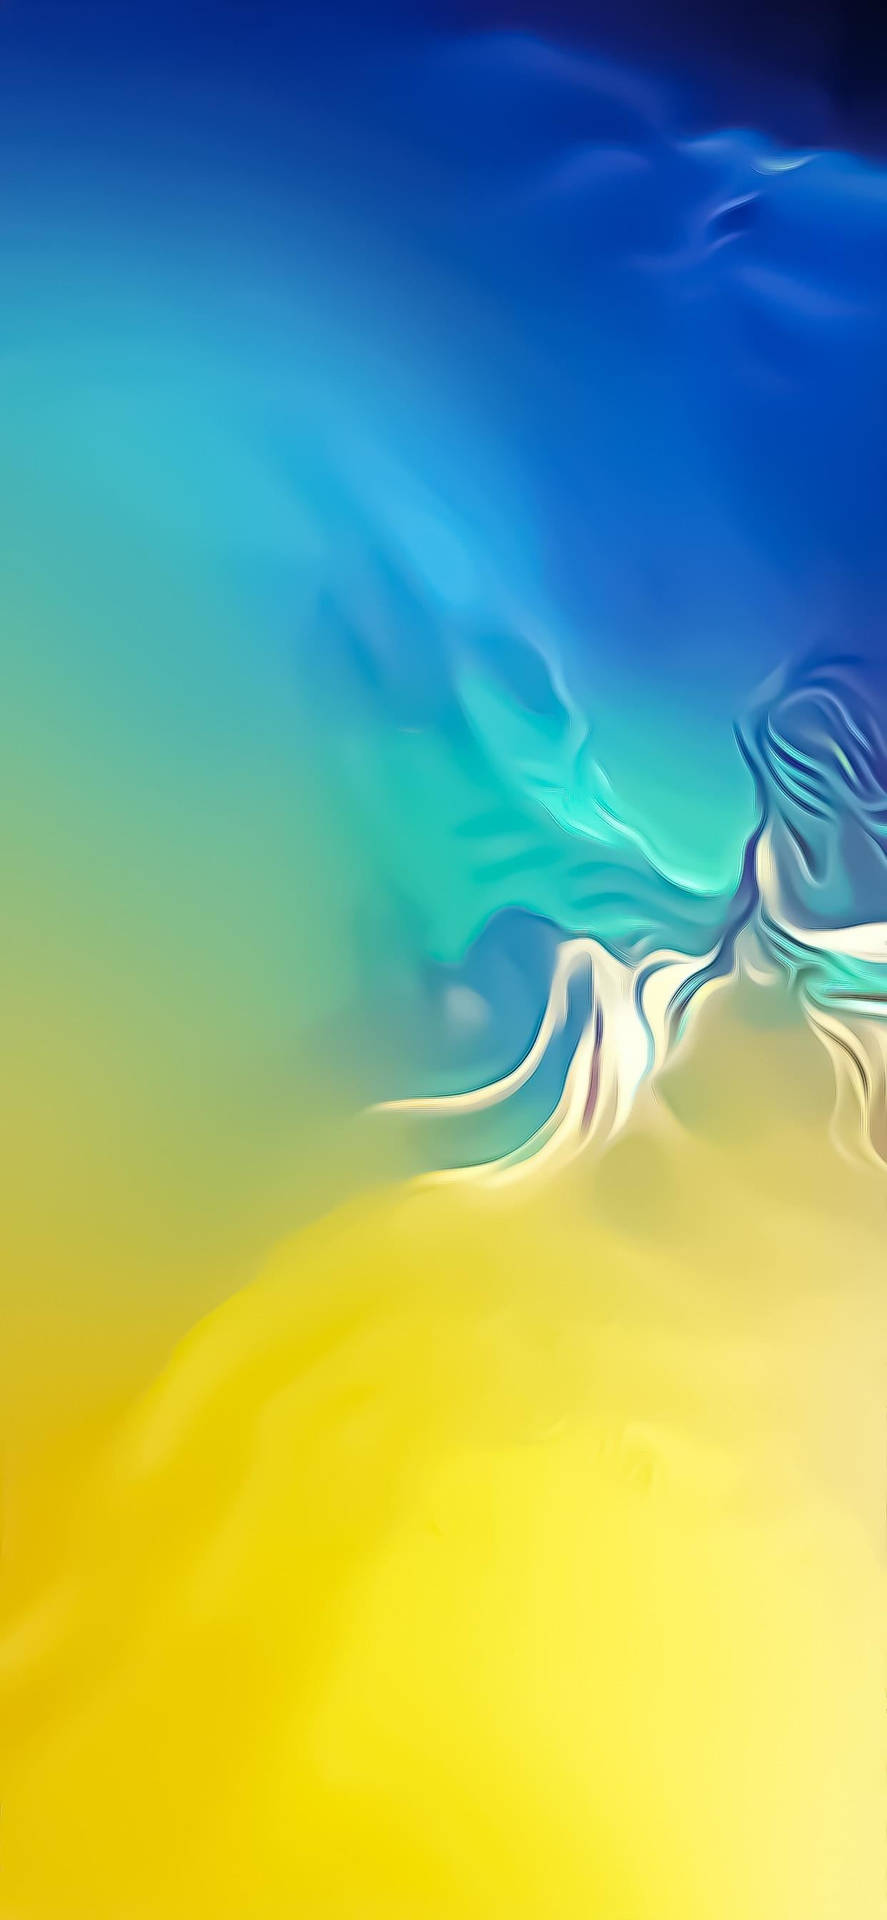 Yellow And Teal Abstract Samsung Background